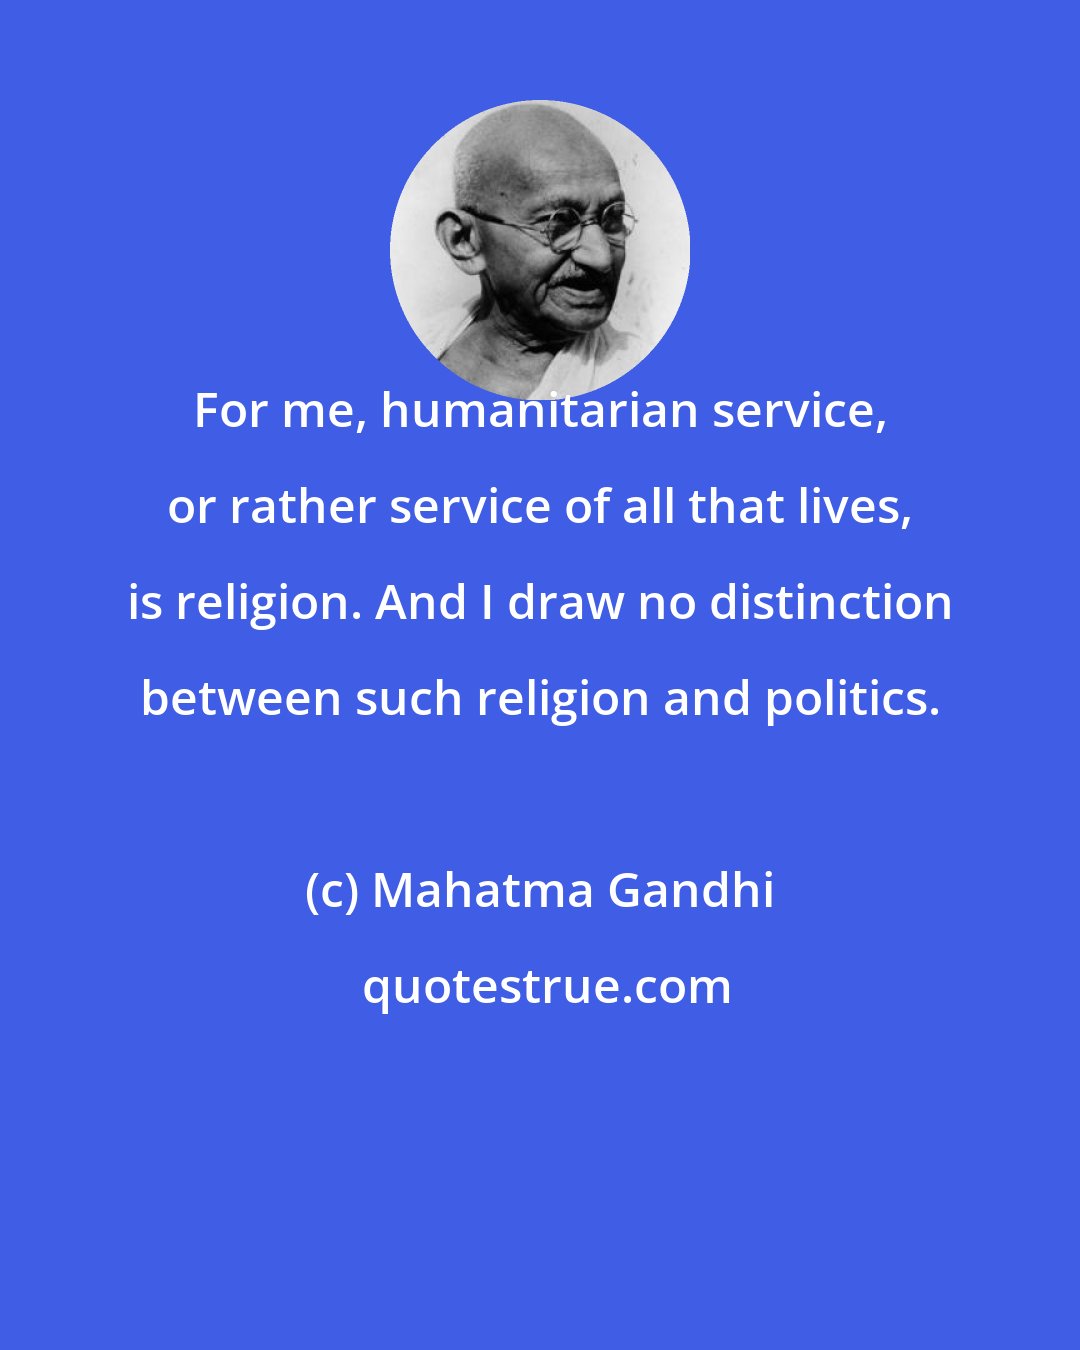 Mahatma Gandhi: For me, humanitarian service, or rather service of all that lives, is religion. And I draw no distinction between such religion and politics.